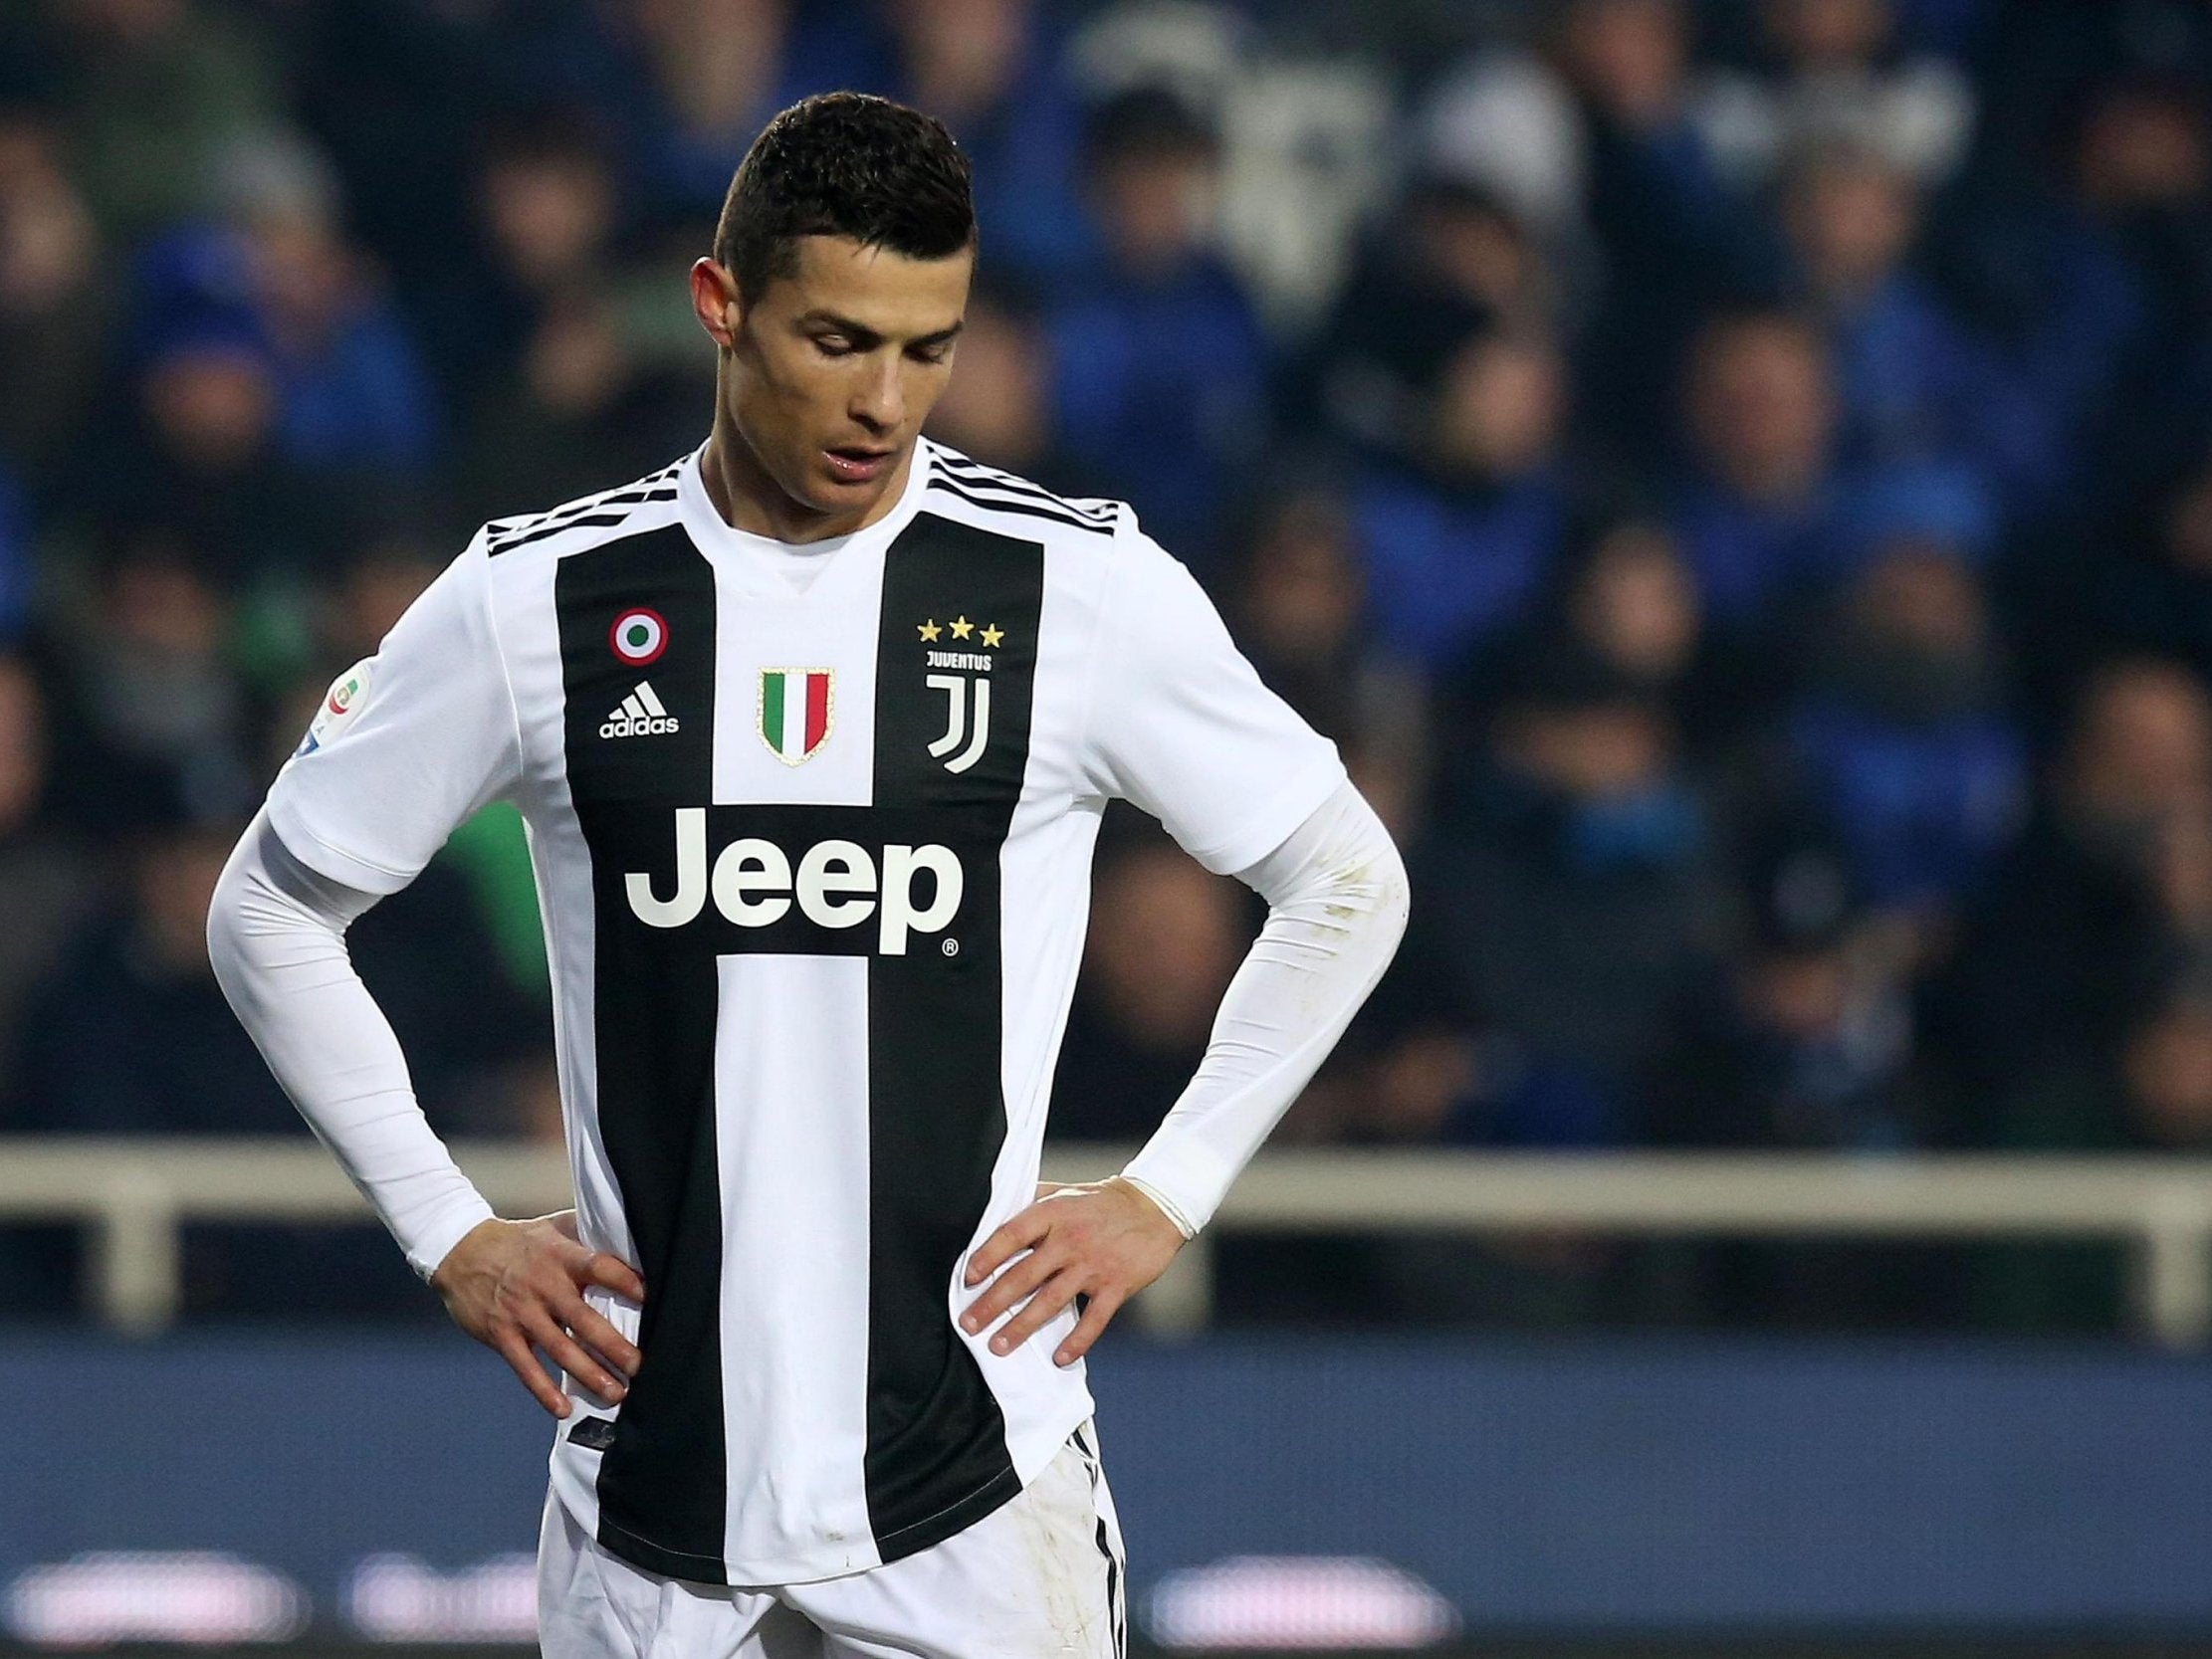 Ronaldo's arrival could not find Juventus the third goal they needed